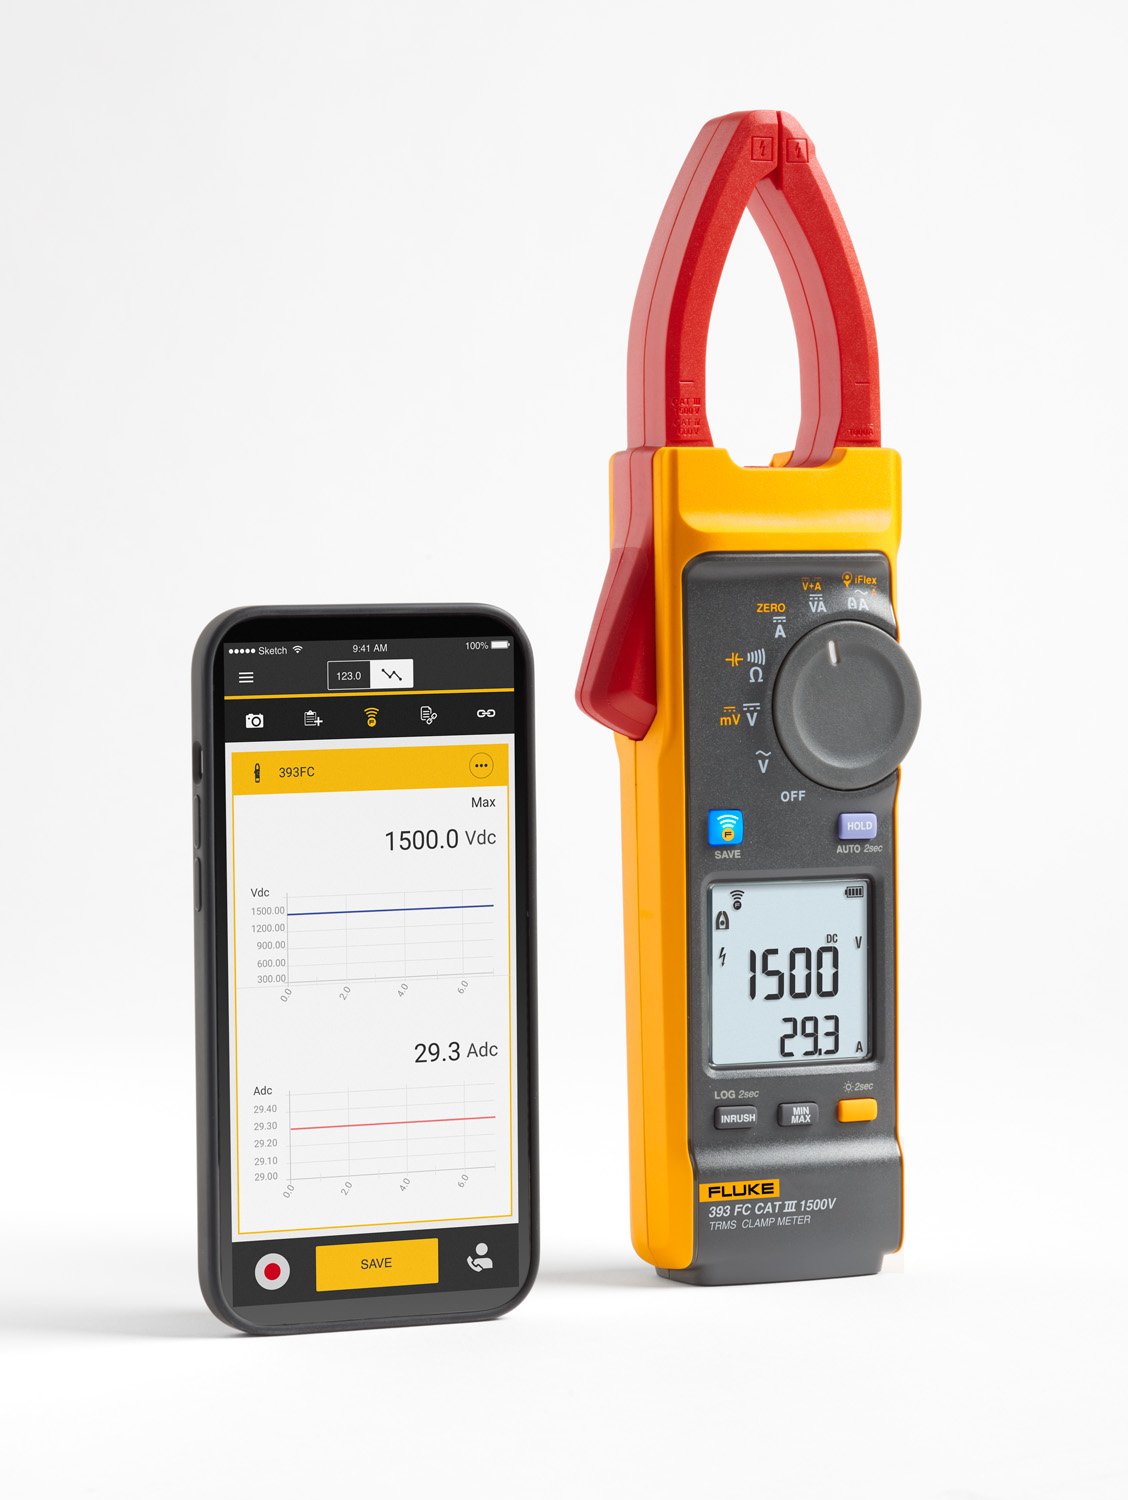 Picture of the Fluke 393 FC CAT III 1500 V True-rms Clamp Meter on the right and the Fluke Connect app displayed on a smartphone beside it on the left